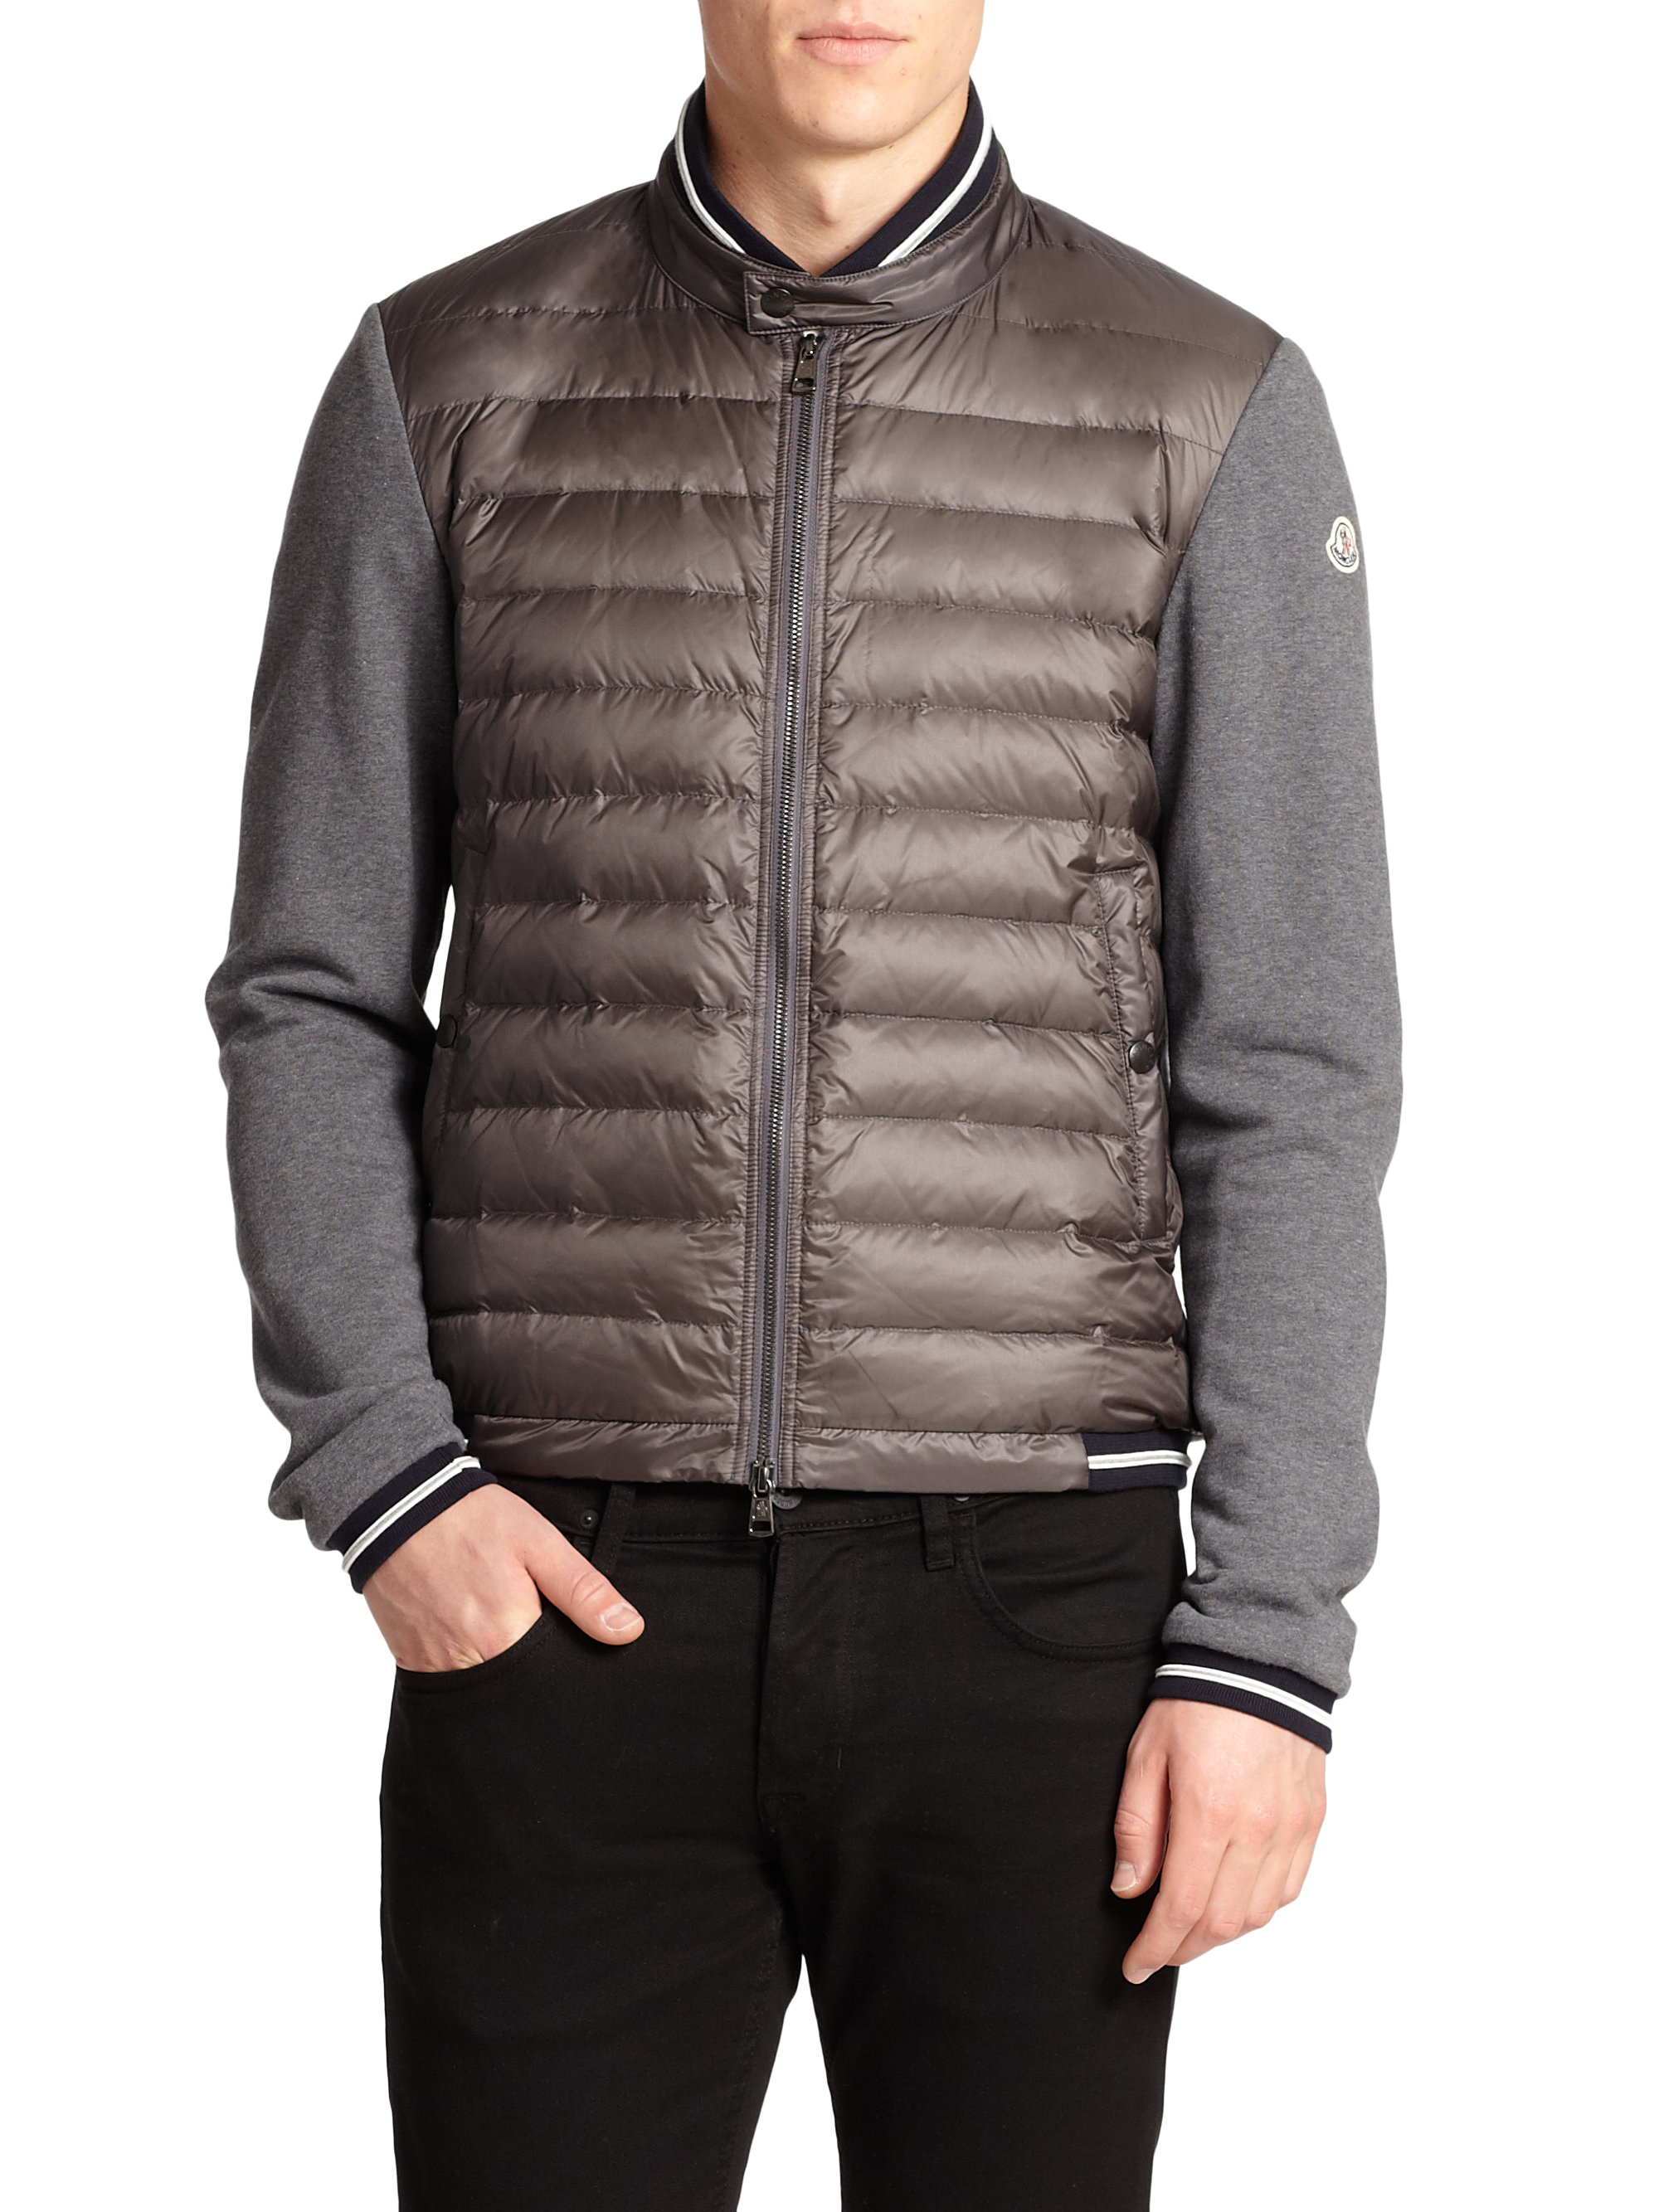 Moncler Down Puffer Cardigan Sweater in Gray for Men - Lyst